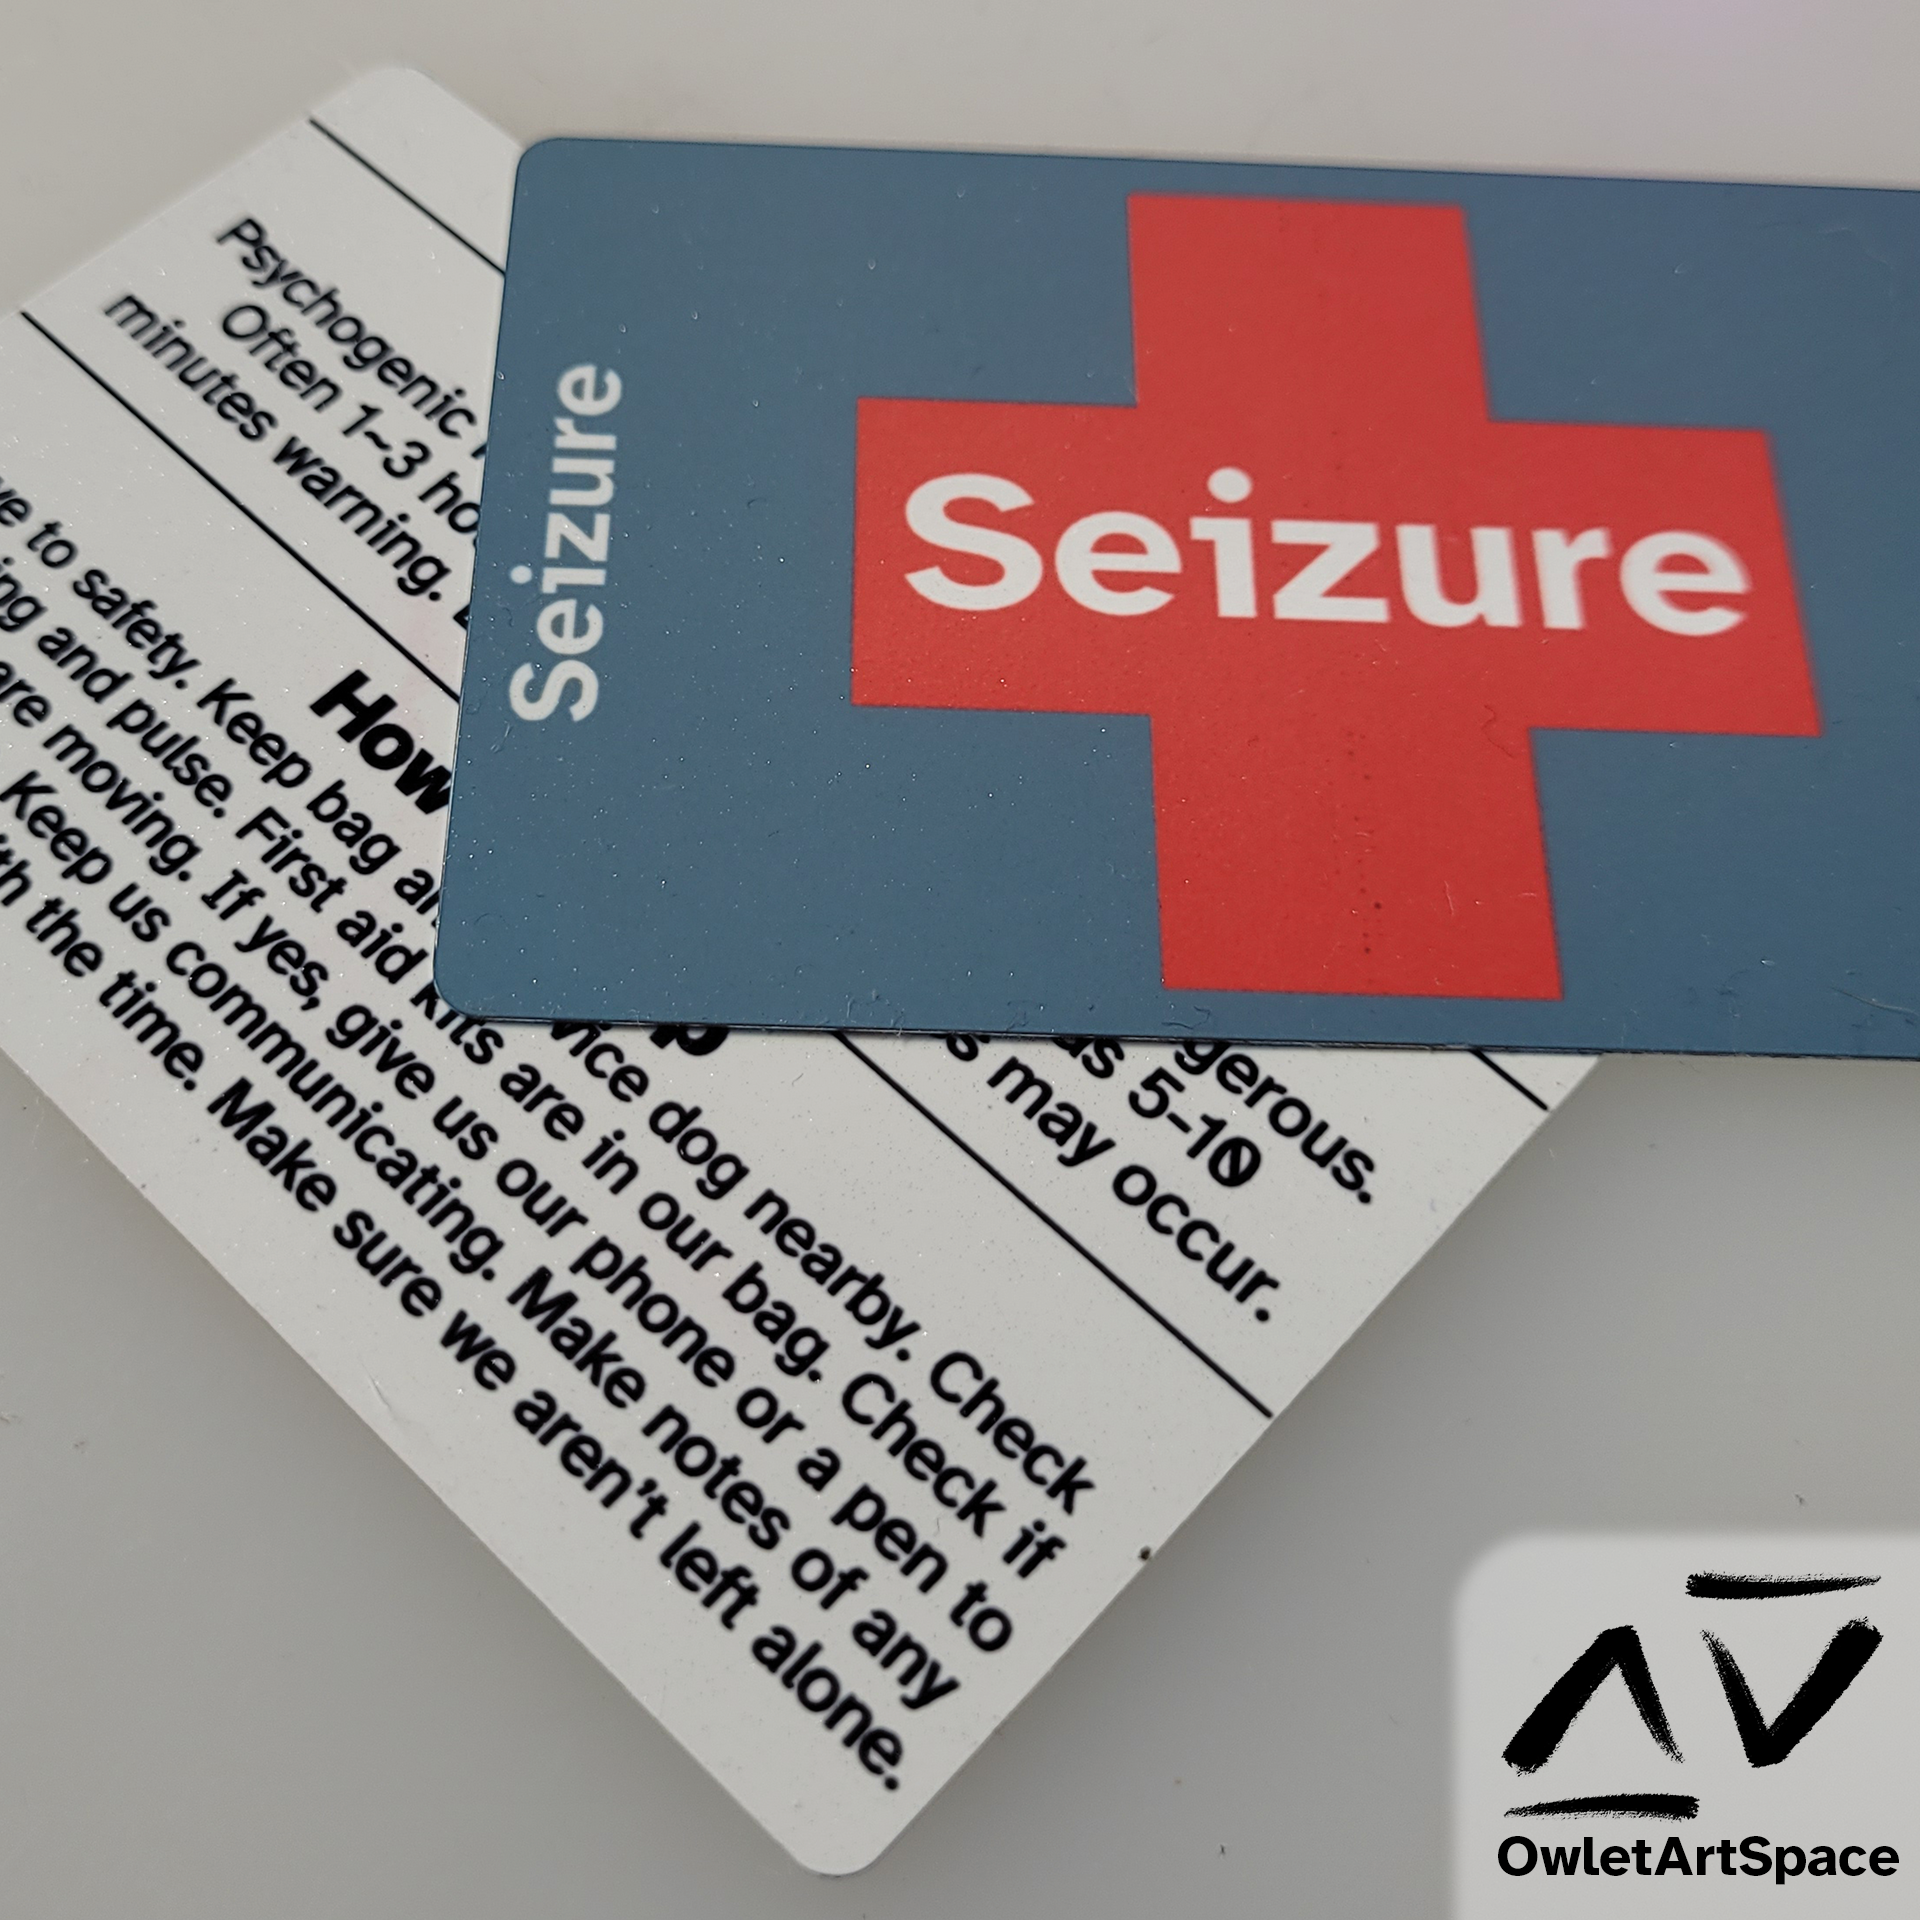 Two identical metal cards that on one side haS a red cross with the word "Seizure", once in the center and two on each side. On the other side, there is the word "Seizure" on the top, then a description of the type of seizure, and then instructions on how to help.